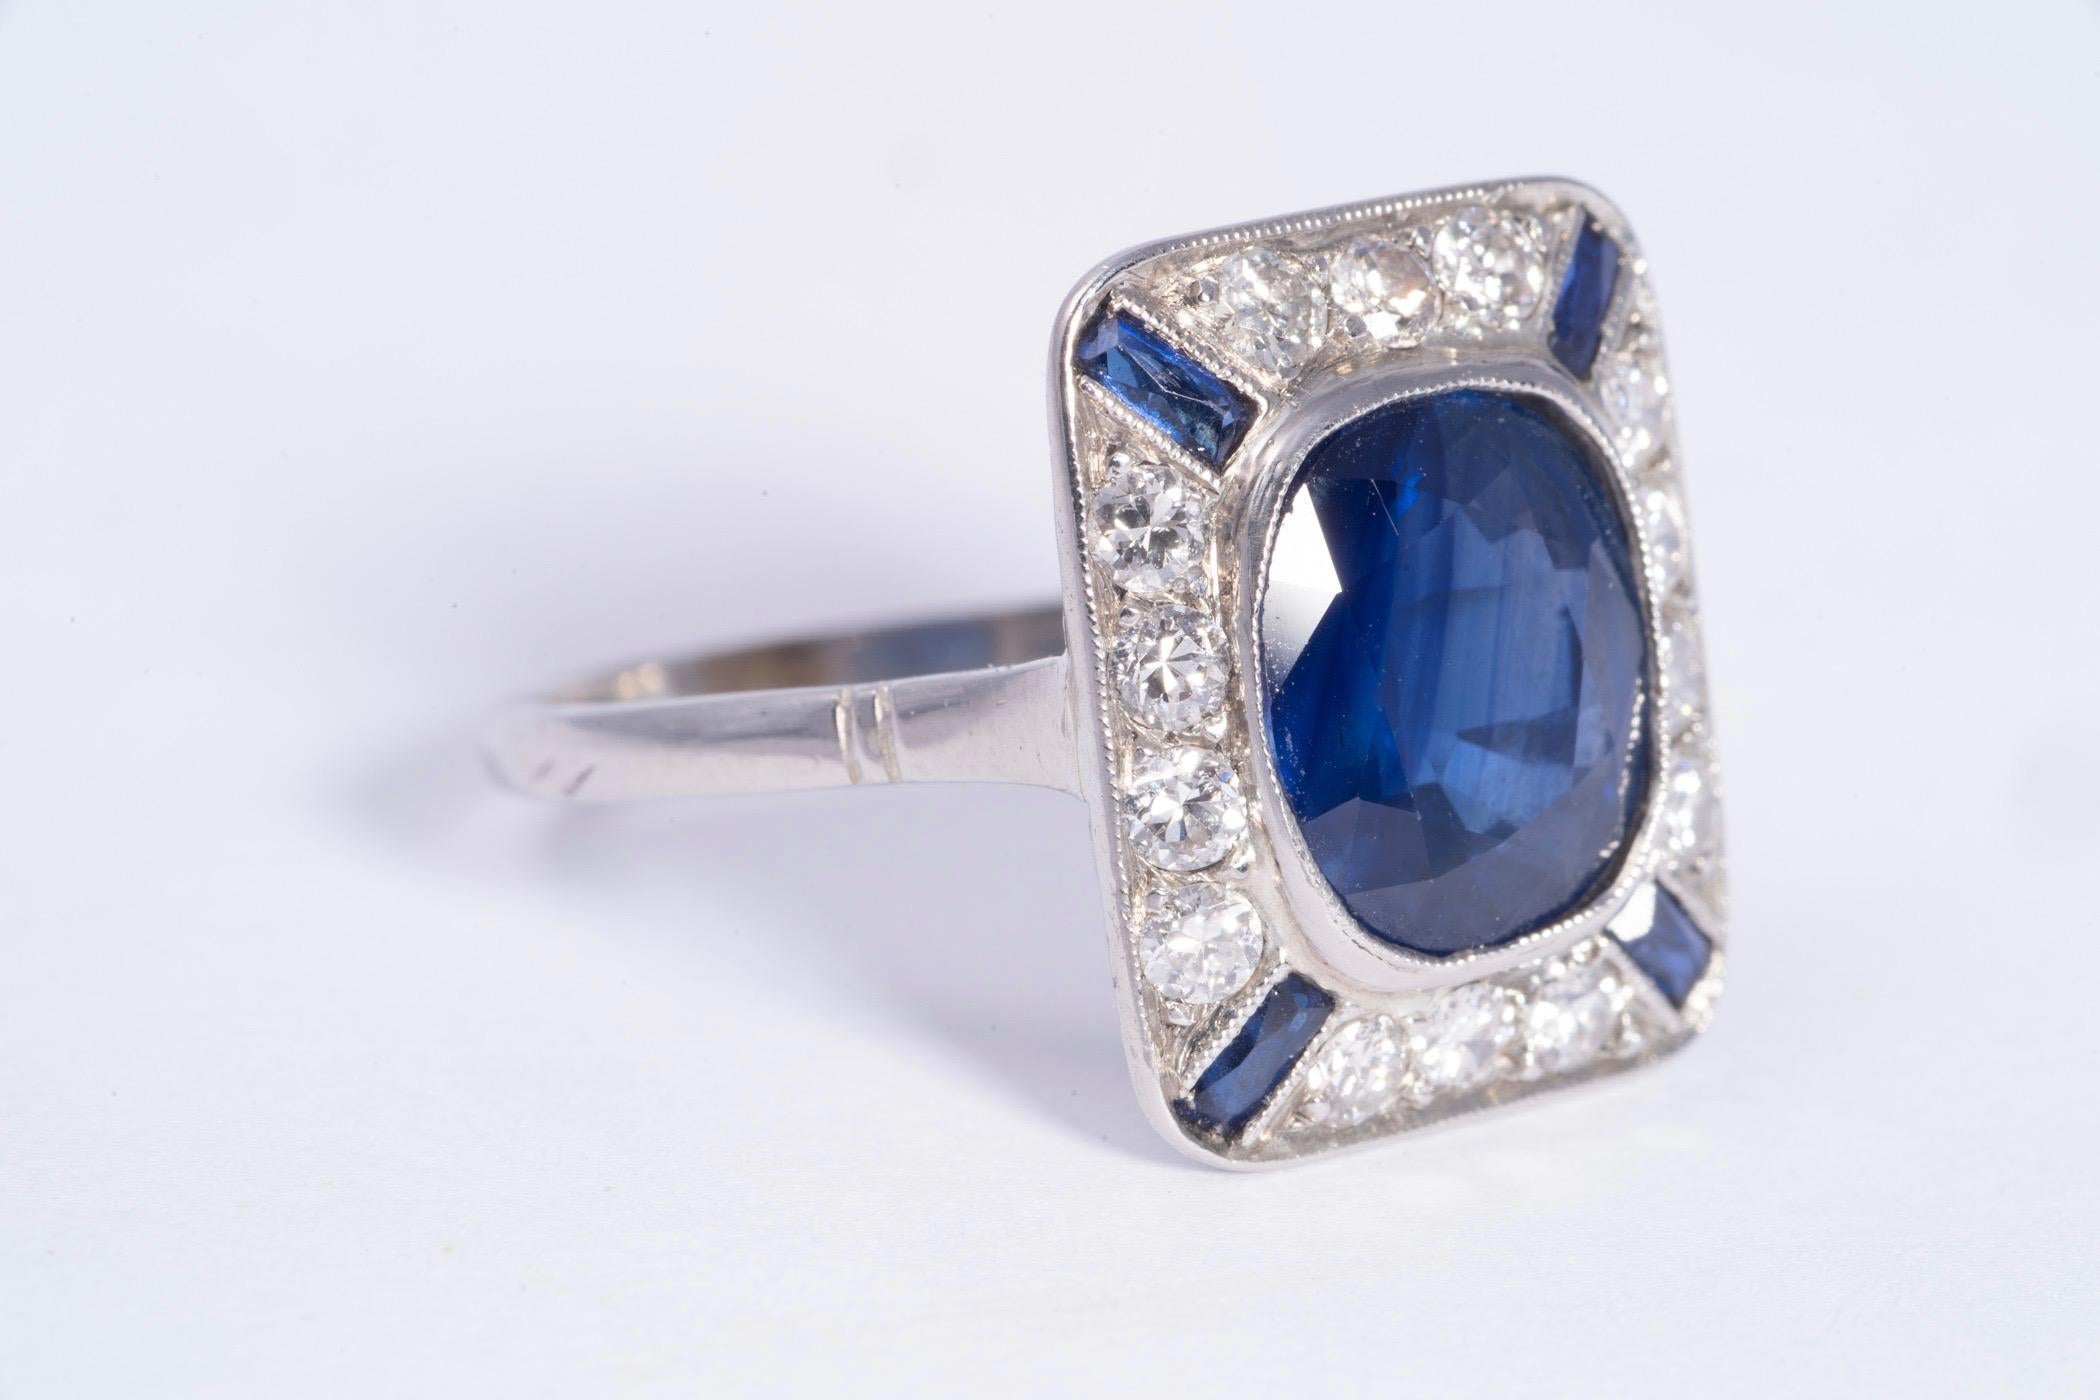 Cushion cut blue sapphire weighing approximately 3.20cts. There are 14 round brilliant cut diamonds around the center blue sapphire that weigh approximately .70cts total. There are 4 blue sapphire baguettes that weigh approximately .40cts total. The